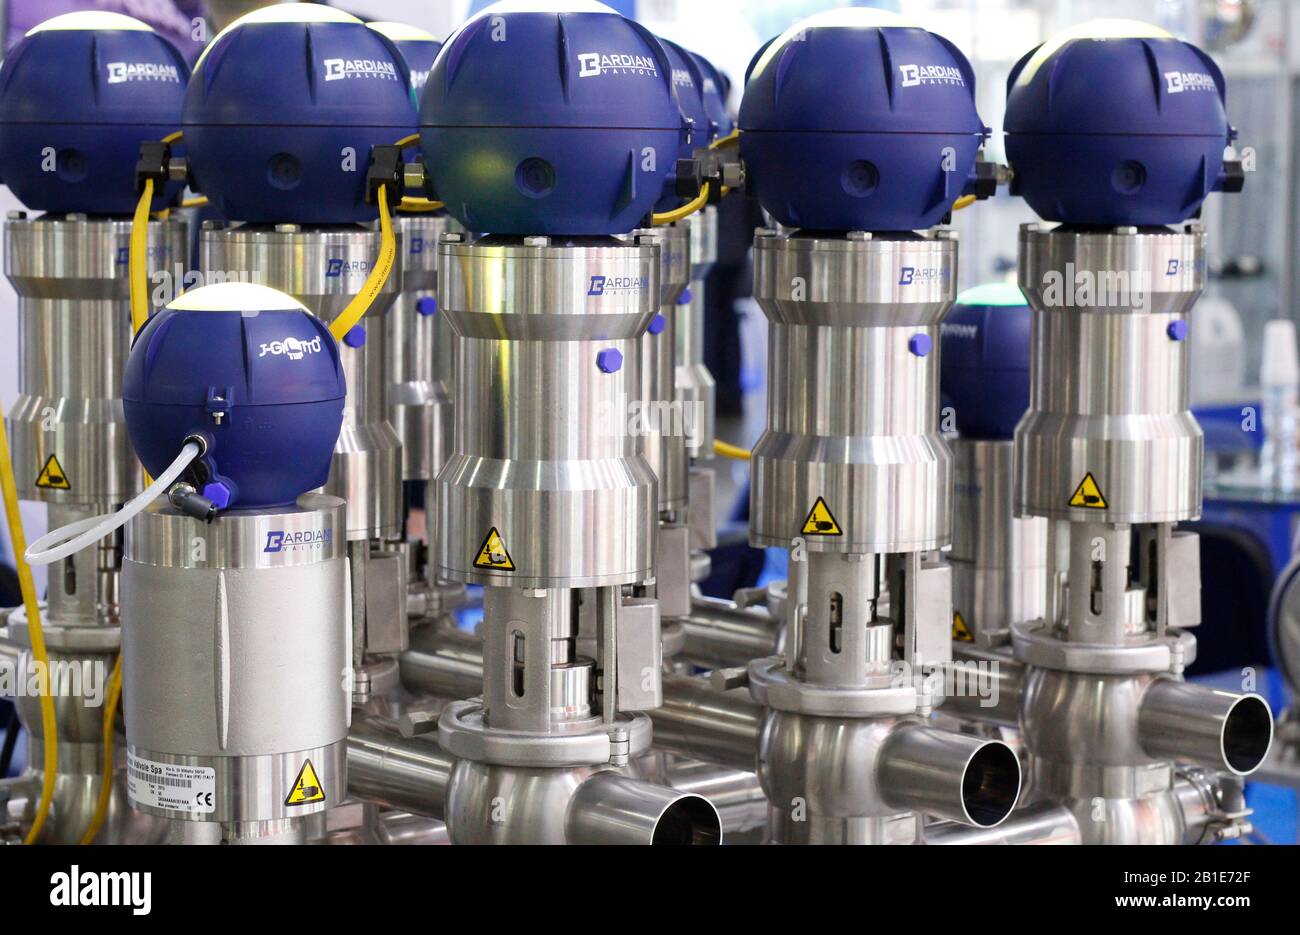 Moscow, RF, 02.20.2020: Valves for use in the food, dairy, chemical, pharmaceutical industries. Valves for the food industry Two-seat valve aseptic di Stock Photo